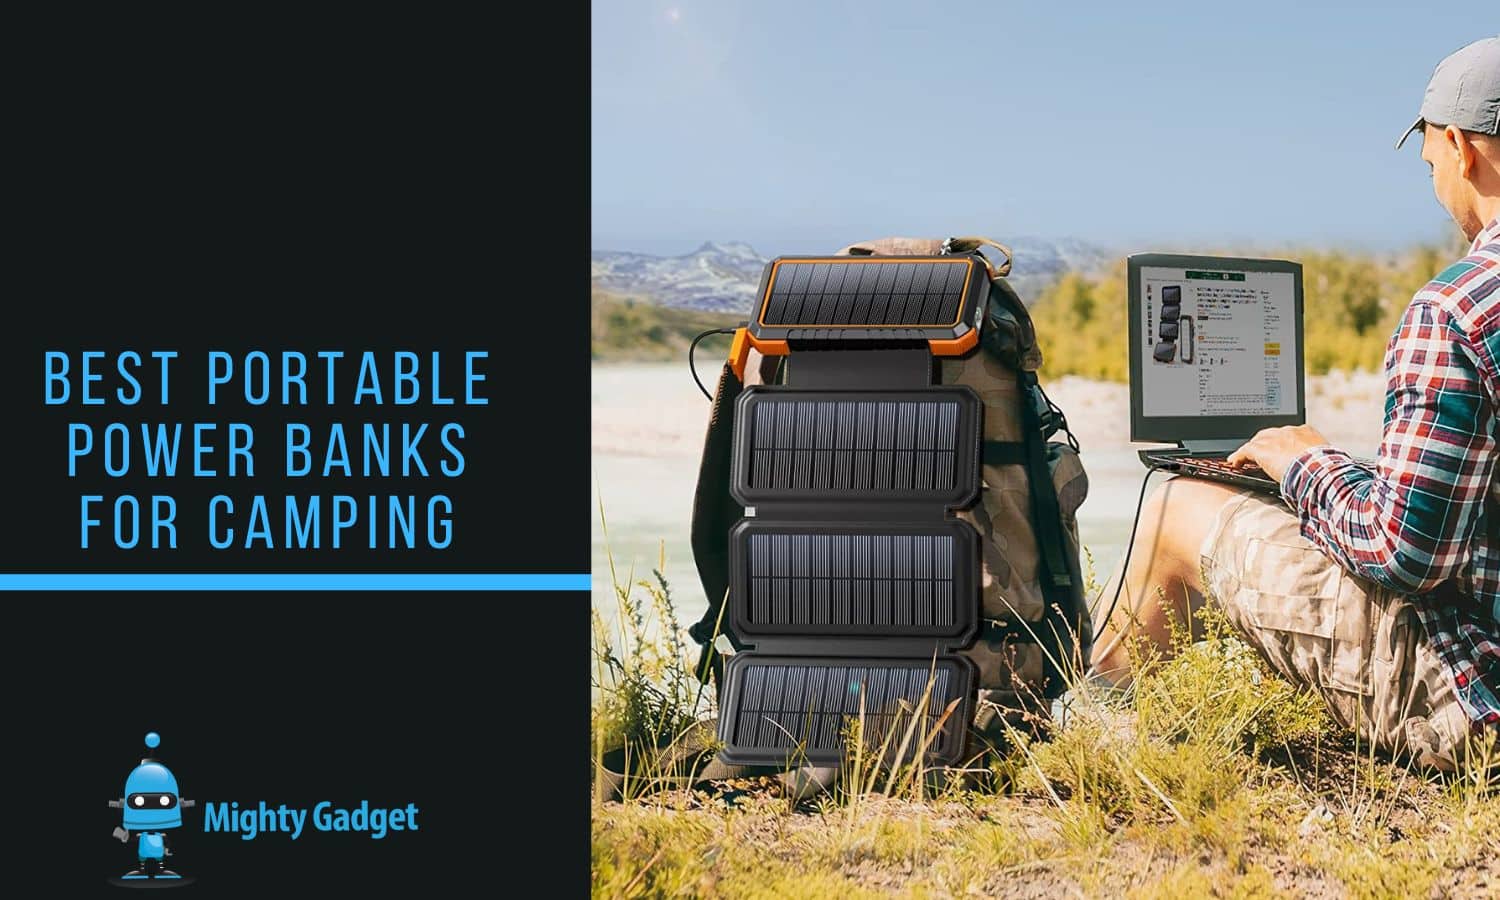 Best Portable Power Banks for Camping